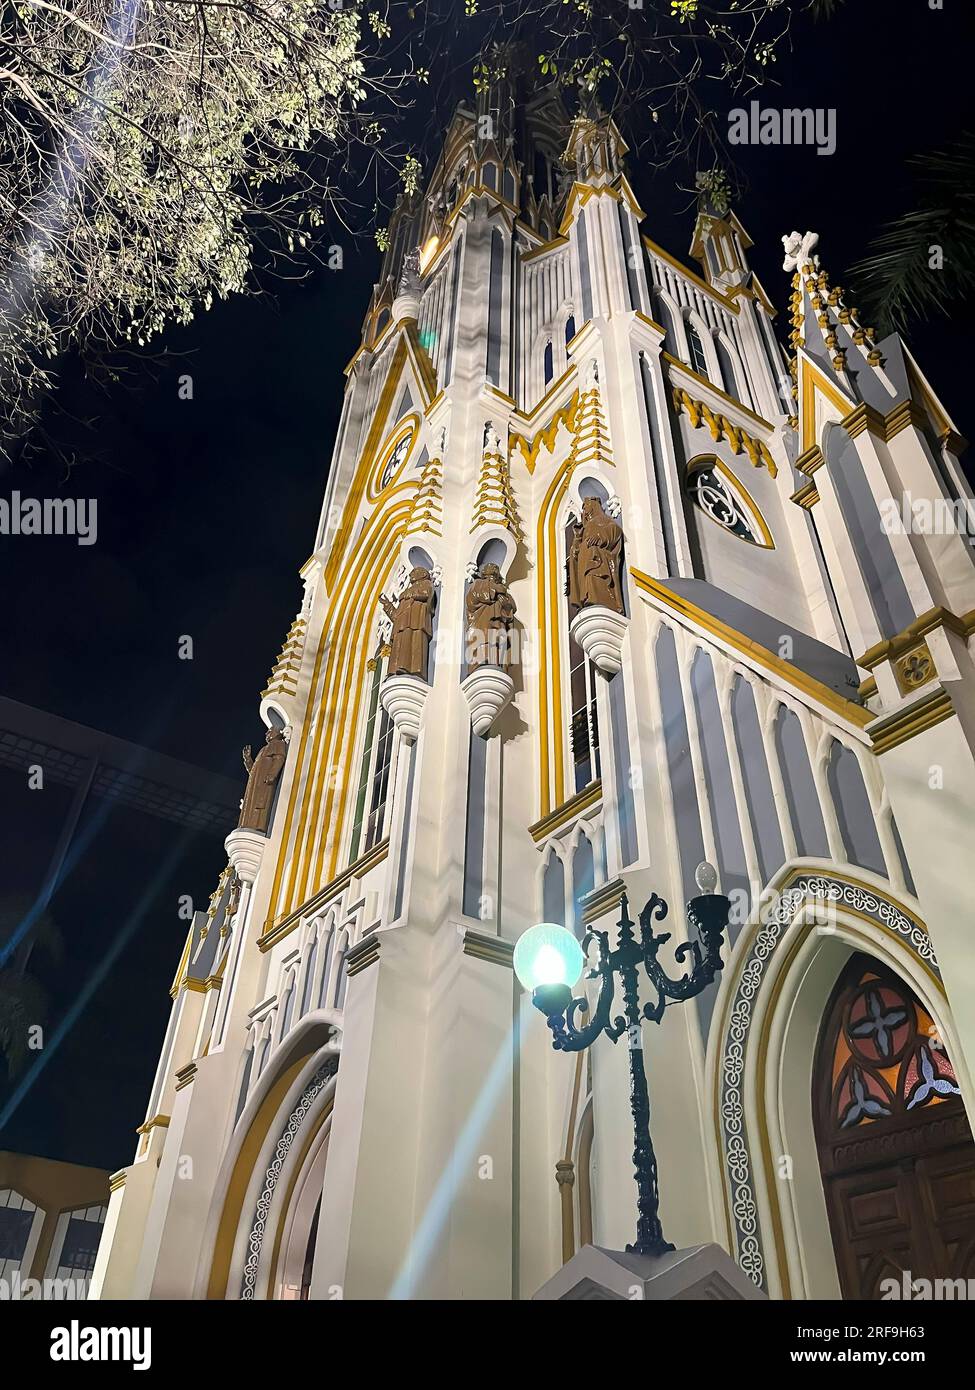 church basilica of Our Lady of Lourdes, city of Belo Horizonte, Brazil Stock Photo